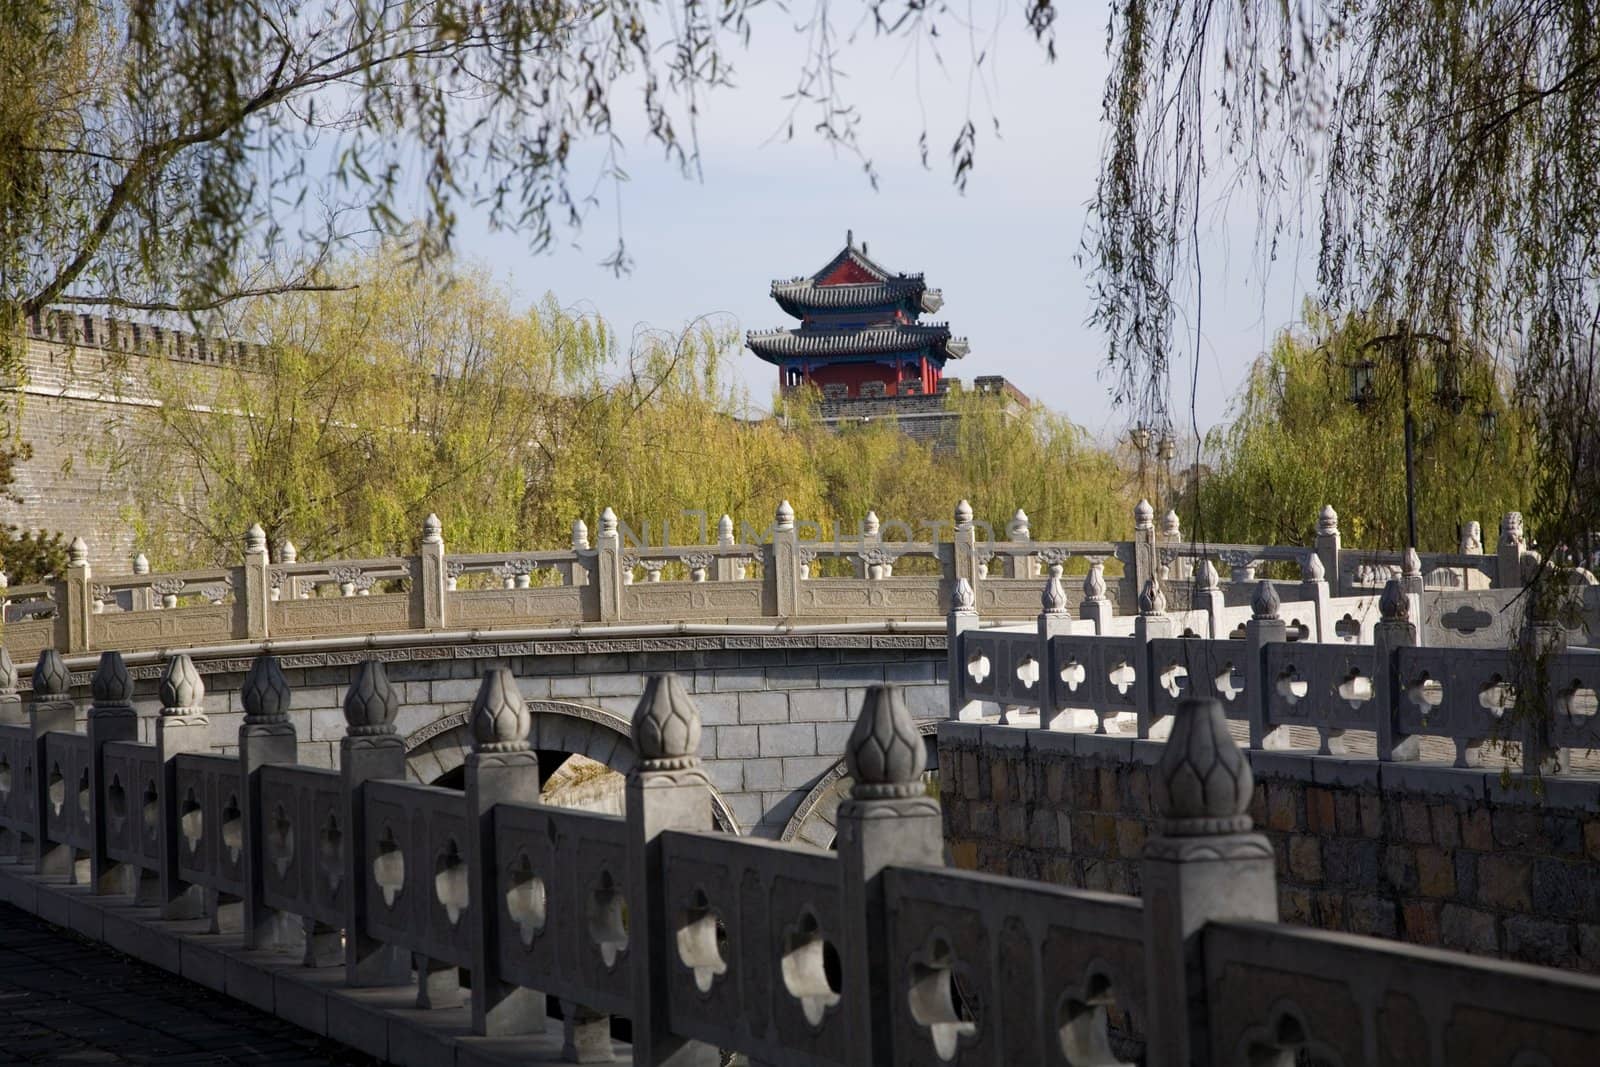 City Wall and Tower, Qufu, Shandong Province, China.  This is Confucius City in Shandong Province.